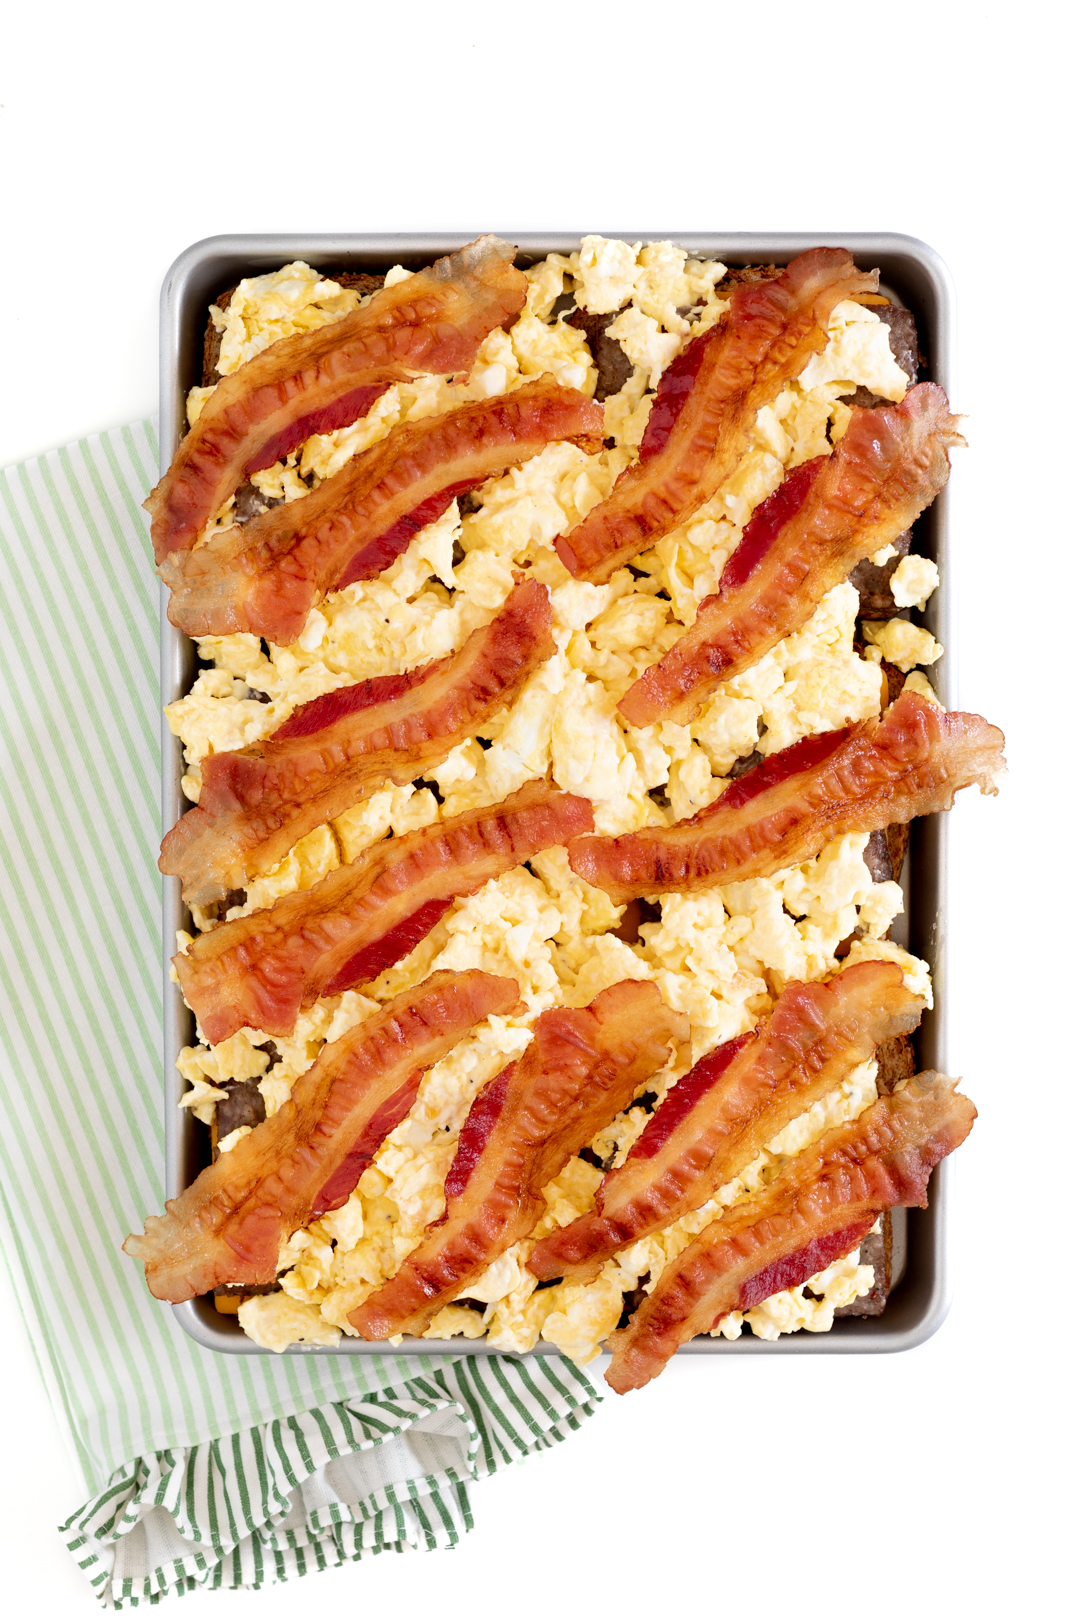 bacon lined on top of scrambled eggs in a baking sheet to prepare sliders